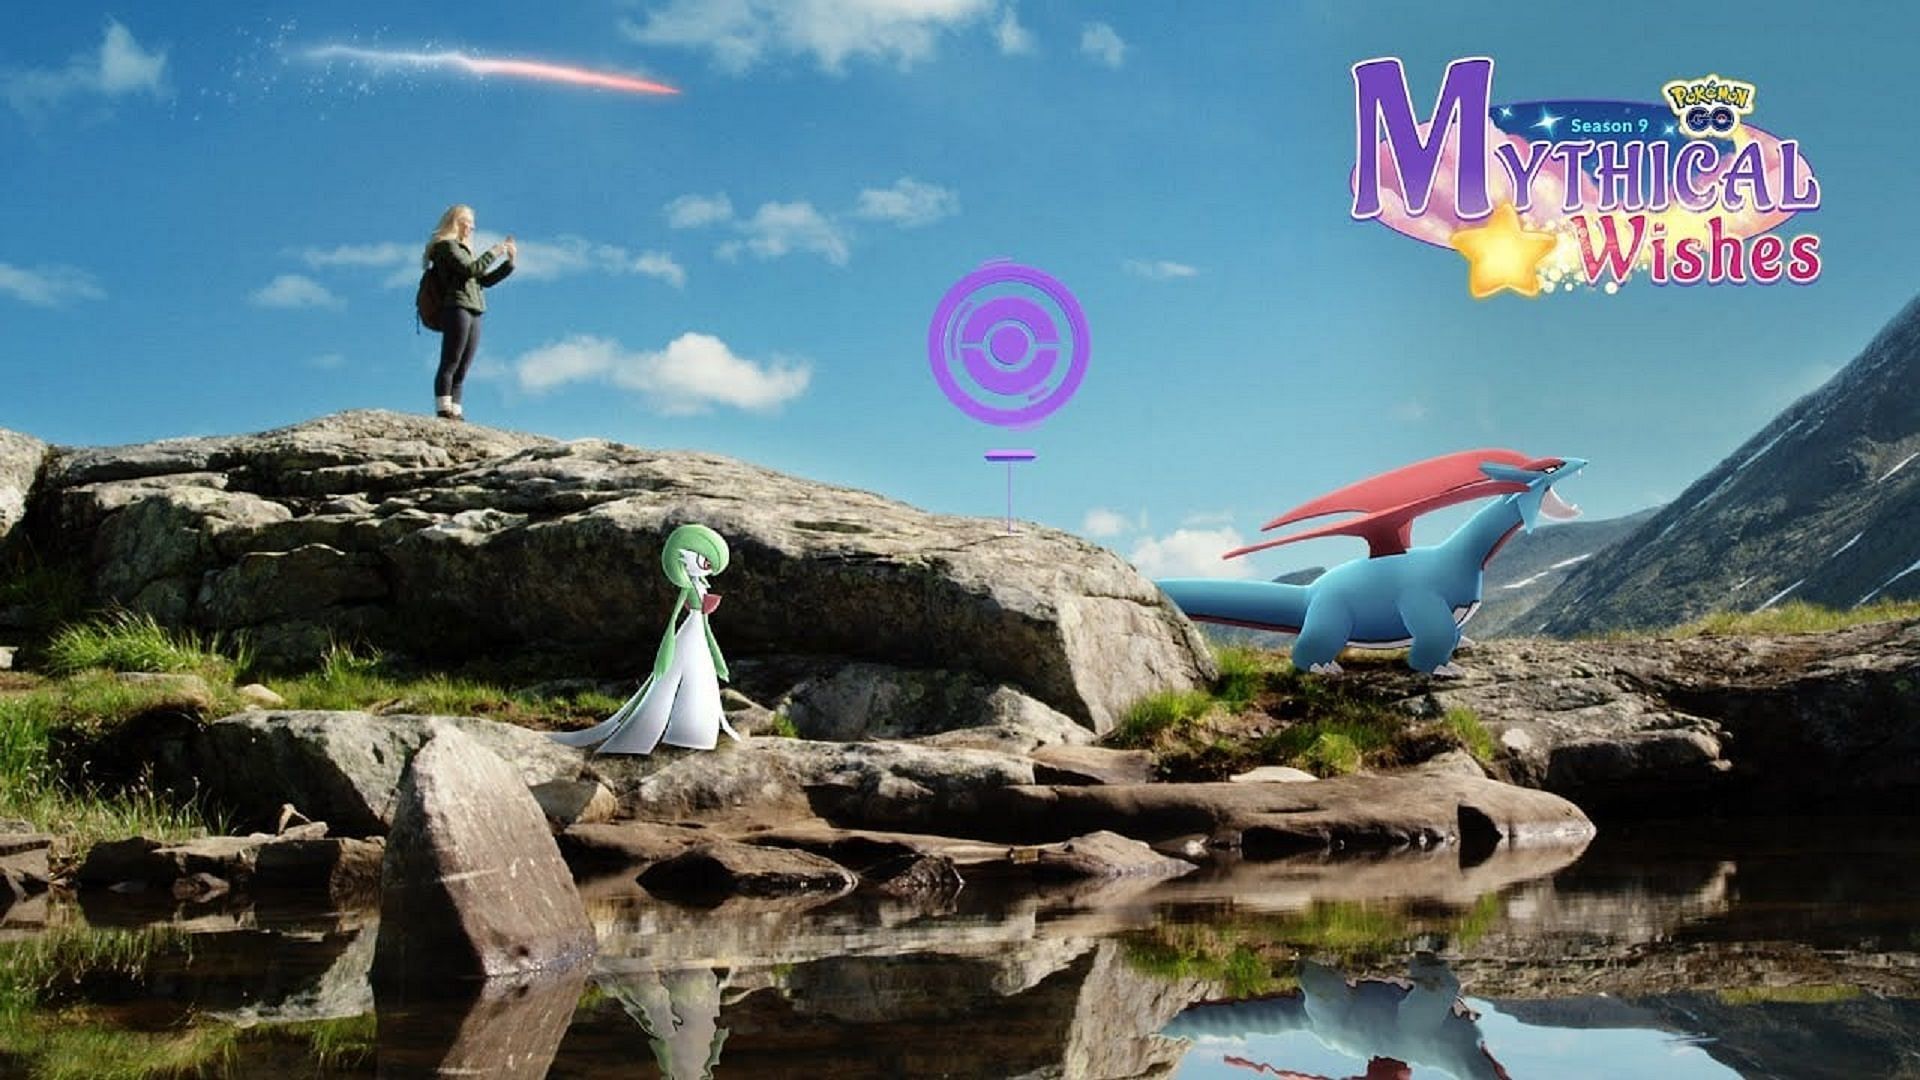 Salamence was referenced in early promotional art for the current Mythical Wishes season (Image via Niantic)